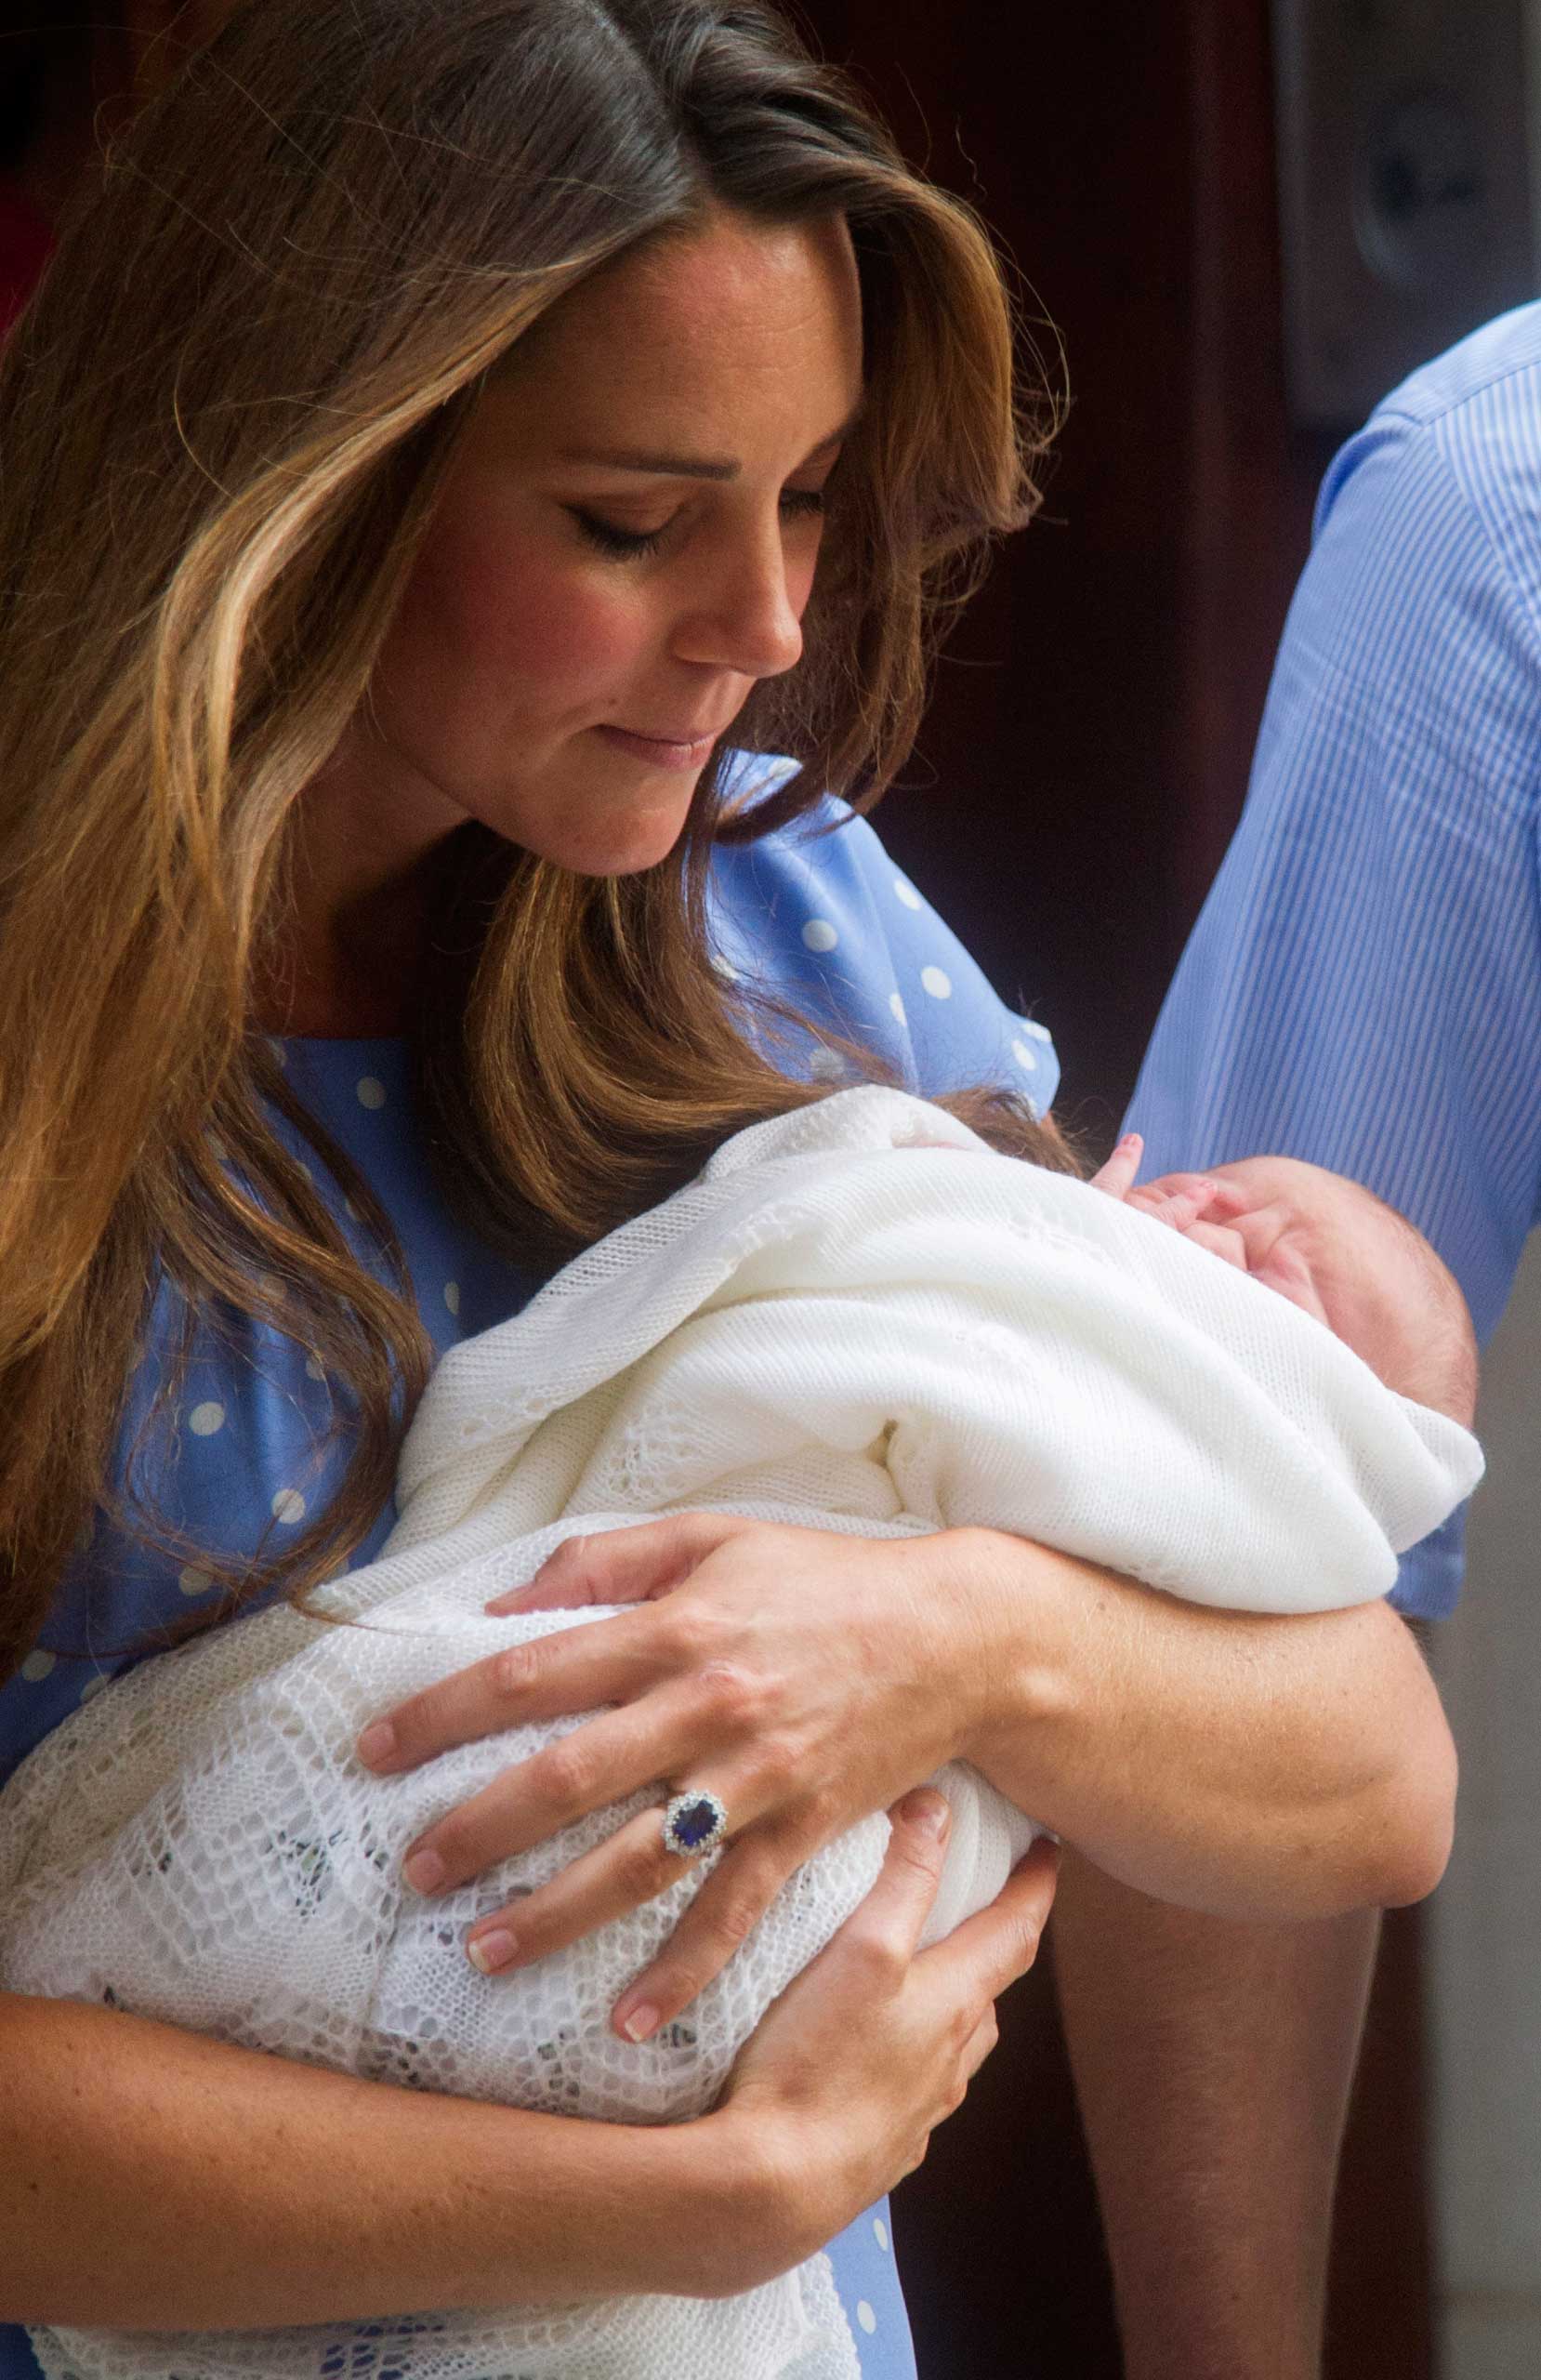 epa03798642 Catherine, Duchess of Cambridge, holds her newborn baby boy ouside St. Mary's hospital in London, Britain, 23 July 2013. Thirty-one year old Catherine, Duchess of Cambridge, gave birth to her, and Prince William's, first child, at 4.24pm BST at the Lindo Wing of St. Mary's hospital on 22 July. EPA/BOGDAN MARAN